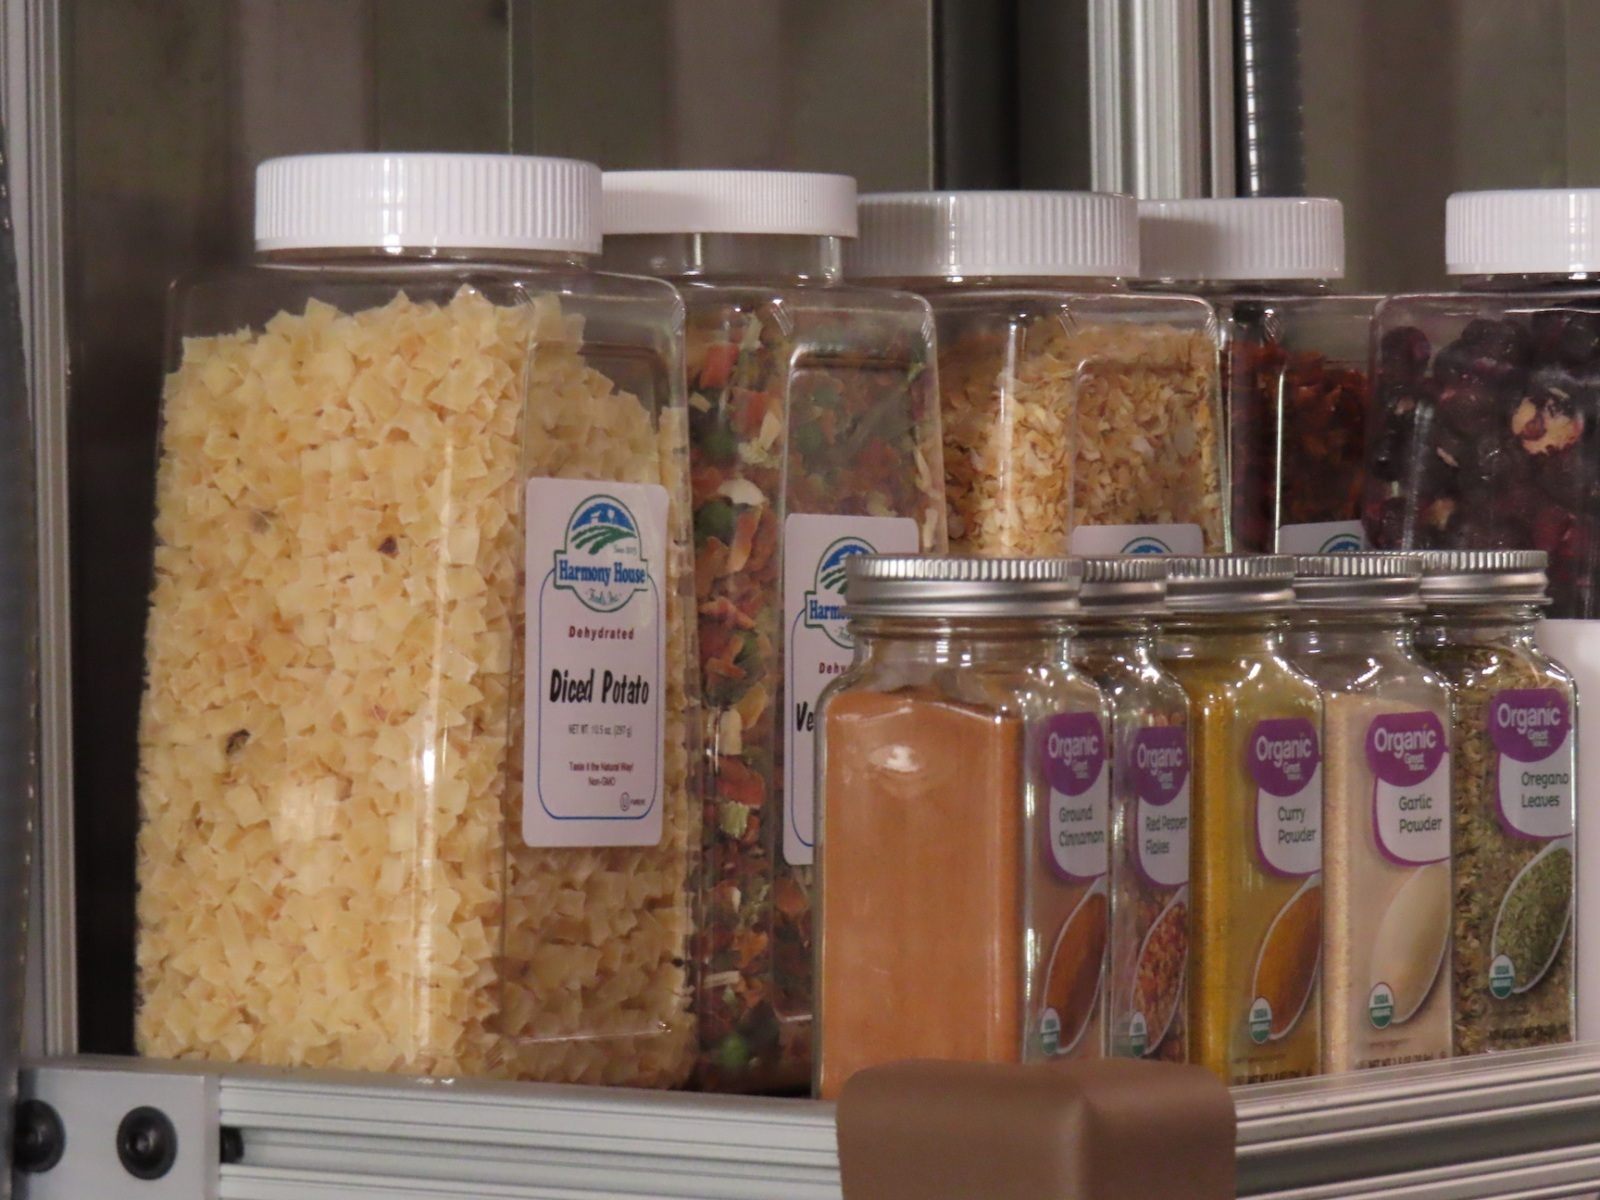 A close-up of the food storage in the kitchen of the Space Analog for the Moon and Mars. Four large jars of dehydrated food including diced potato are visible. Five small jars of spices cinnamon, red pepper flakes, curry powder, garlic powder and oregano leaves are neatly lined up on a shelf in front of the large jars. 